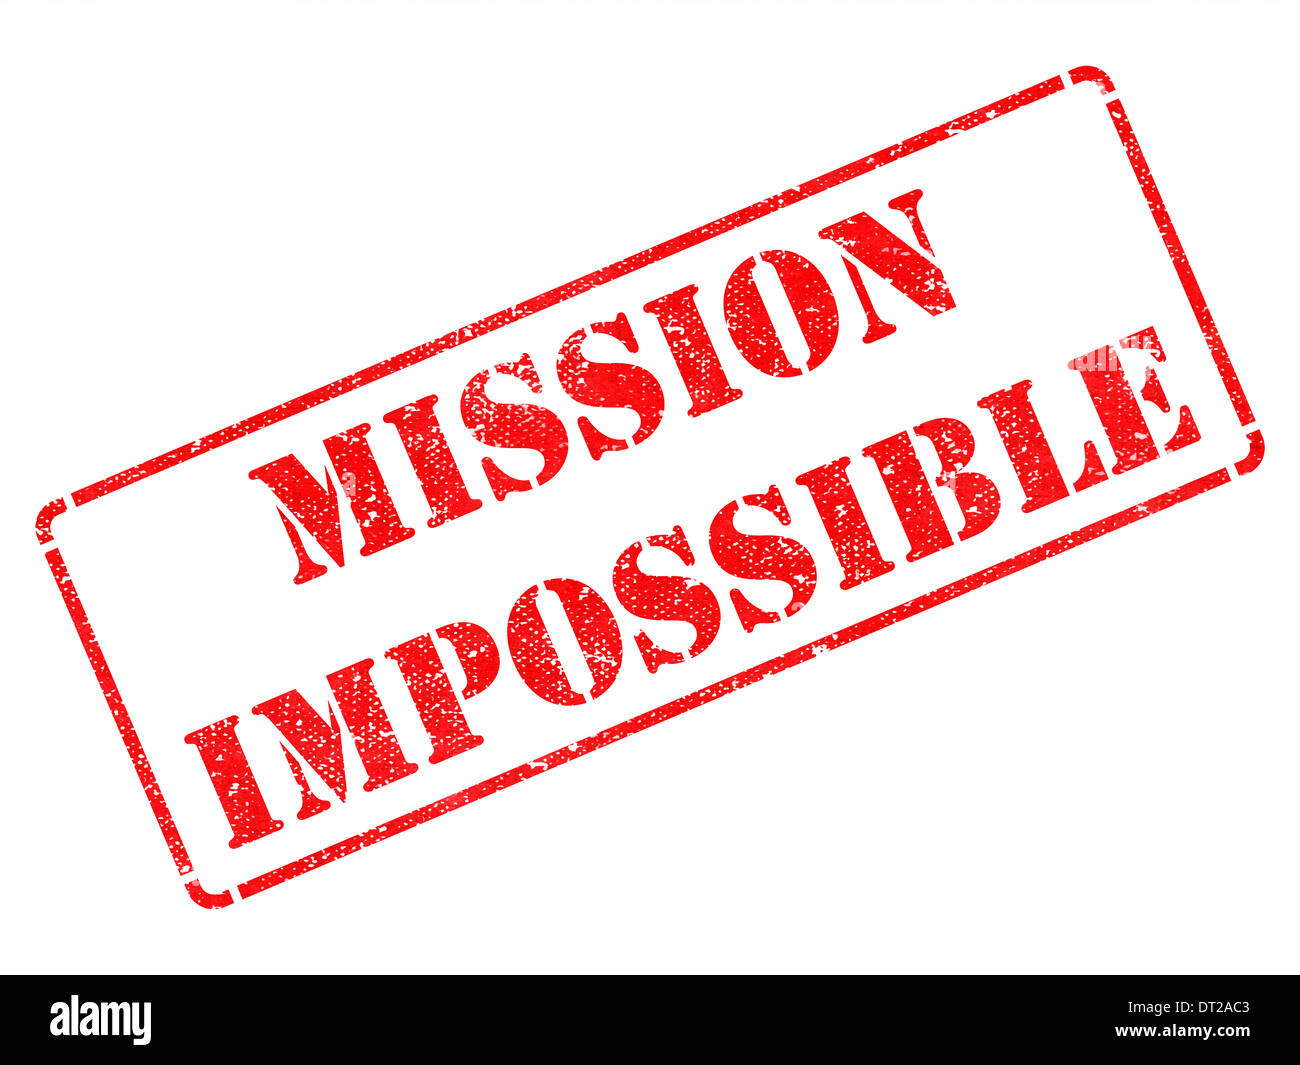 Mission Impossible -  Red Rubber Stamp. Stock Photo